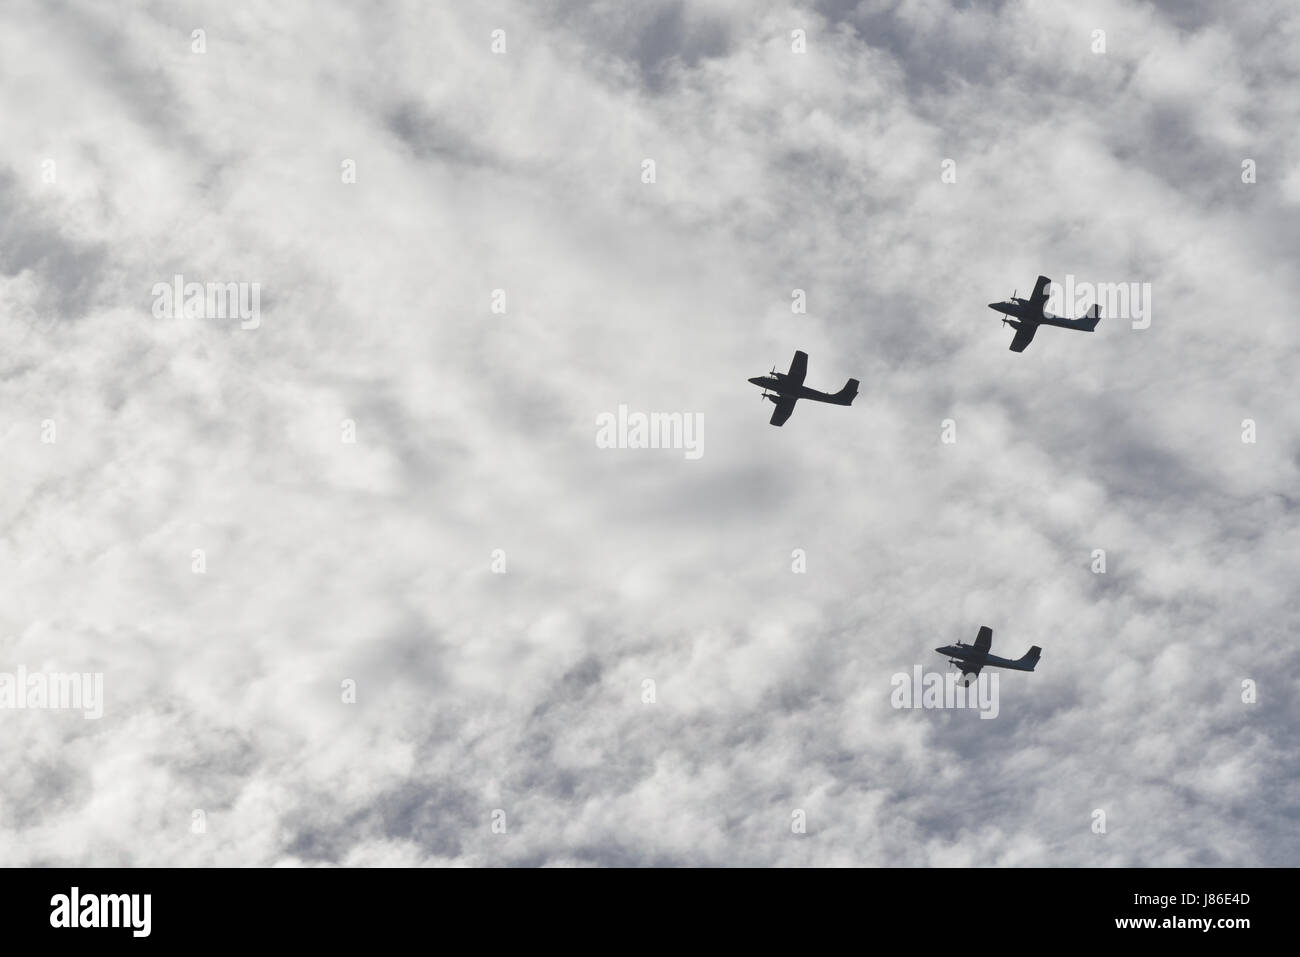 Buenos Aires, Argentina - 27th May, 2017: FMA IA 58 Pucara of the Argentine Air Force during the celebrations of the 207th anniversary of the May Revolution in Buenos Aires. Stock Photo